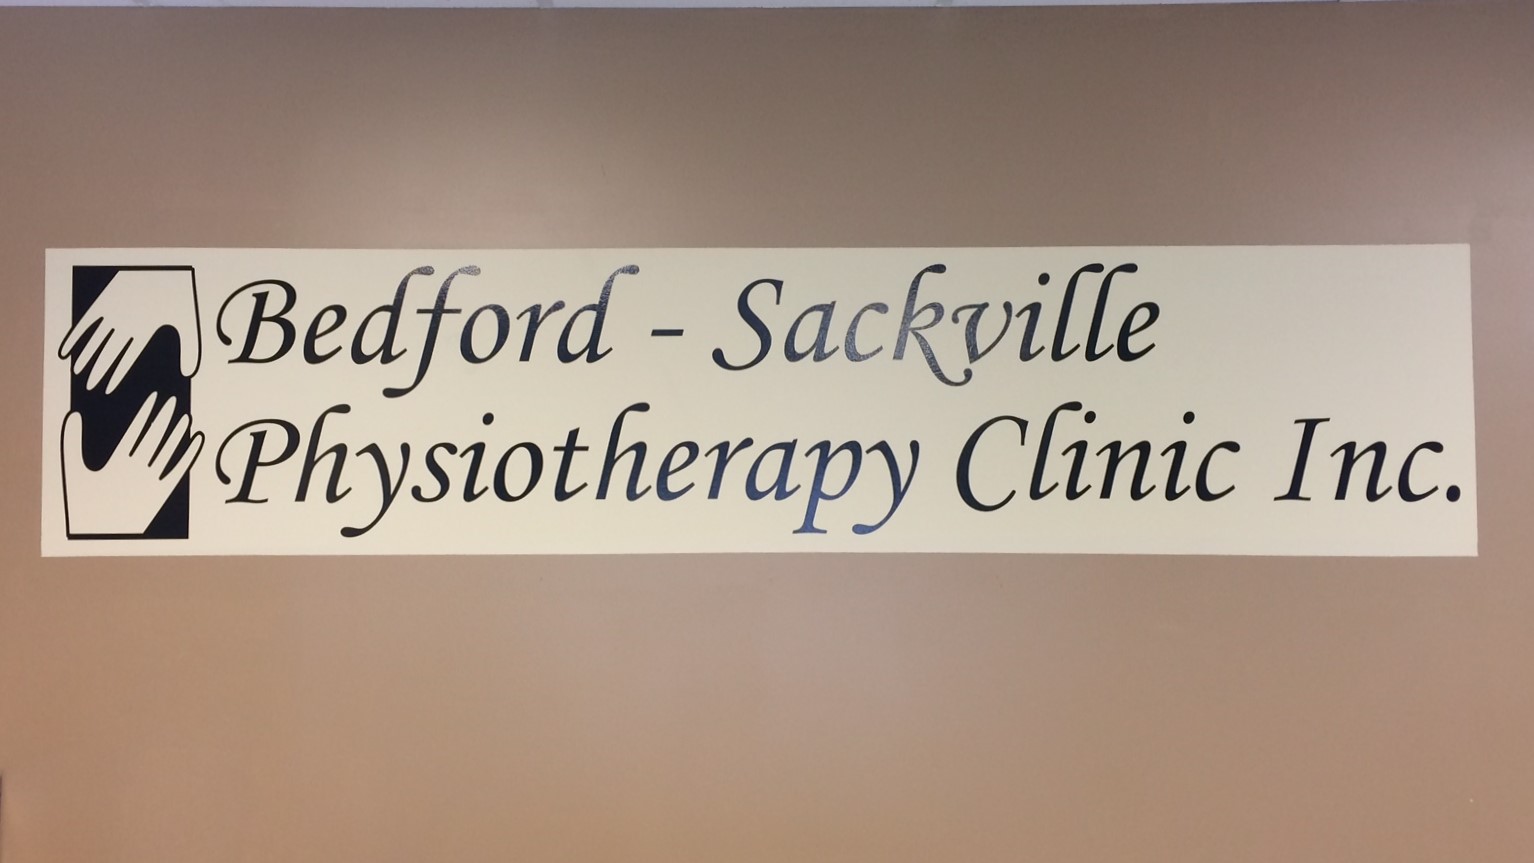 Bedford-Sackville Physiotherapy Clinic Inc